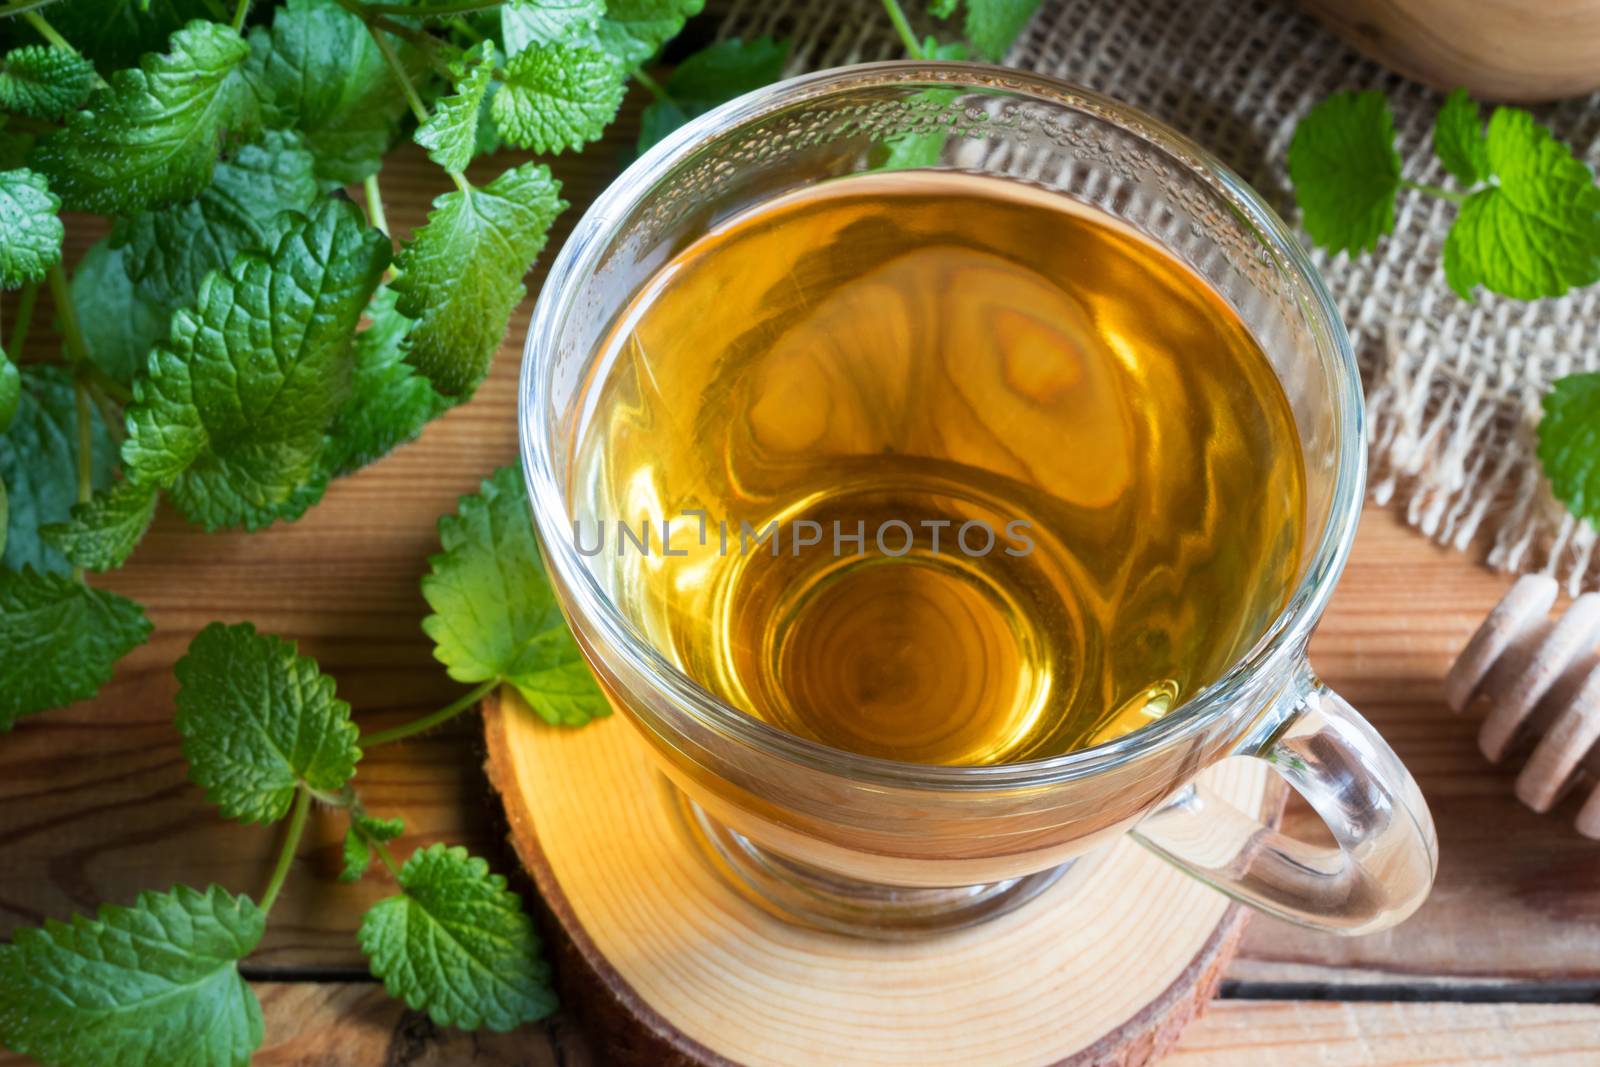 A cup of melissa (lemon balm) tea on a table with fresh melissa leaves in the background